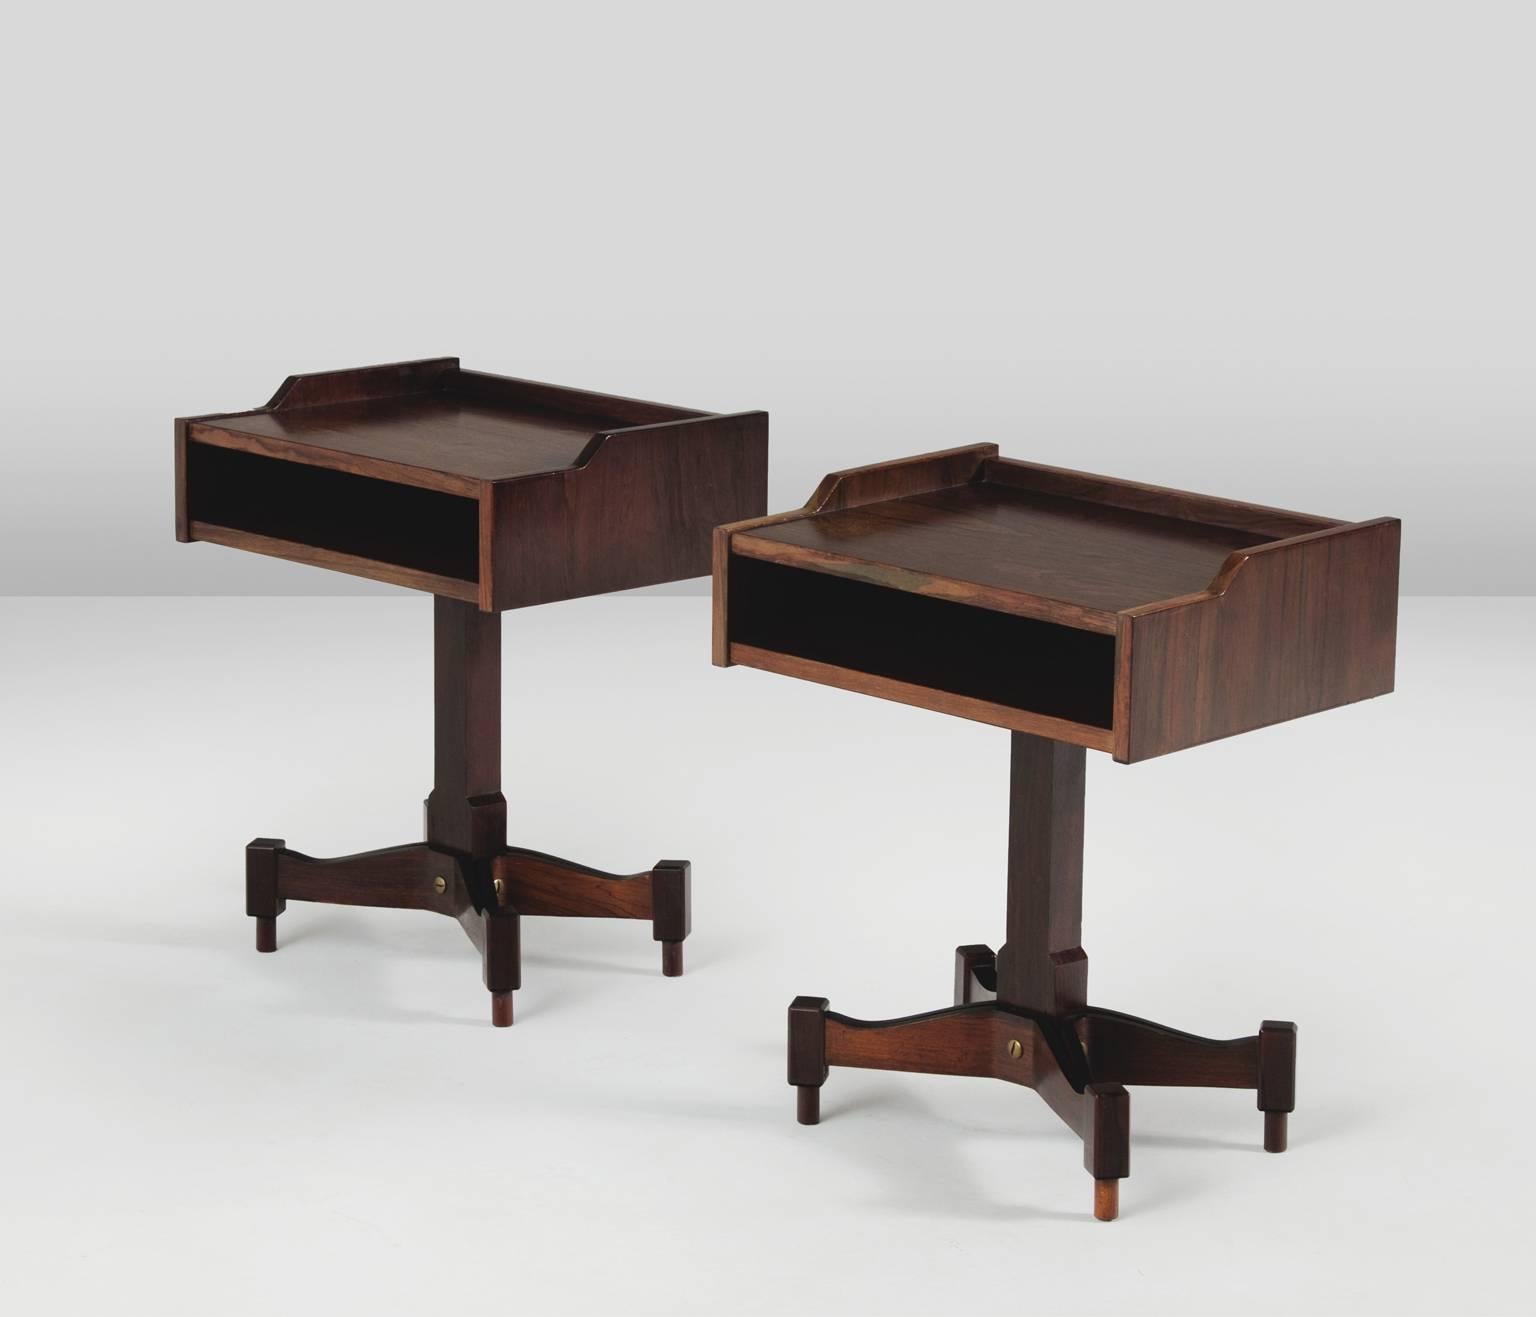 Pair of nightstands, in rosewood, by Claudio Salocchi for Sormani, Italy, 1960s. 

Pair of rosewood side tables with storage facility designed by Claudio Salocchi for Sormani, Italy early 1960s. The typical expressive highly detailed base